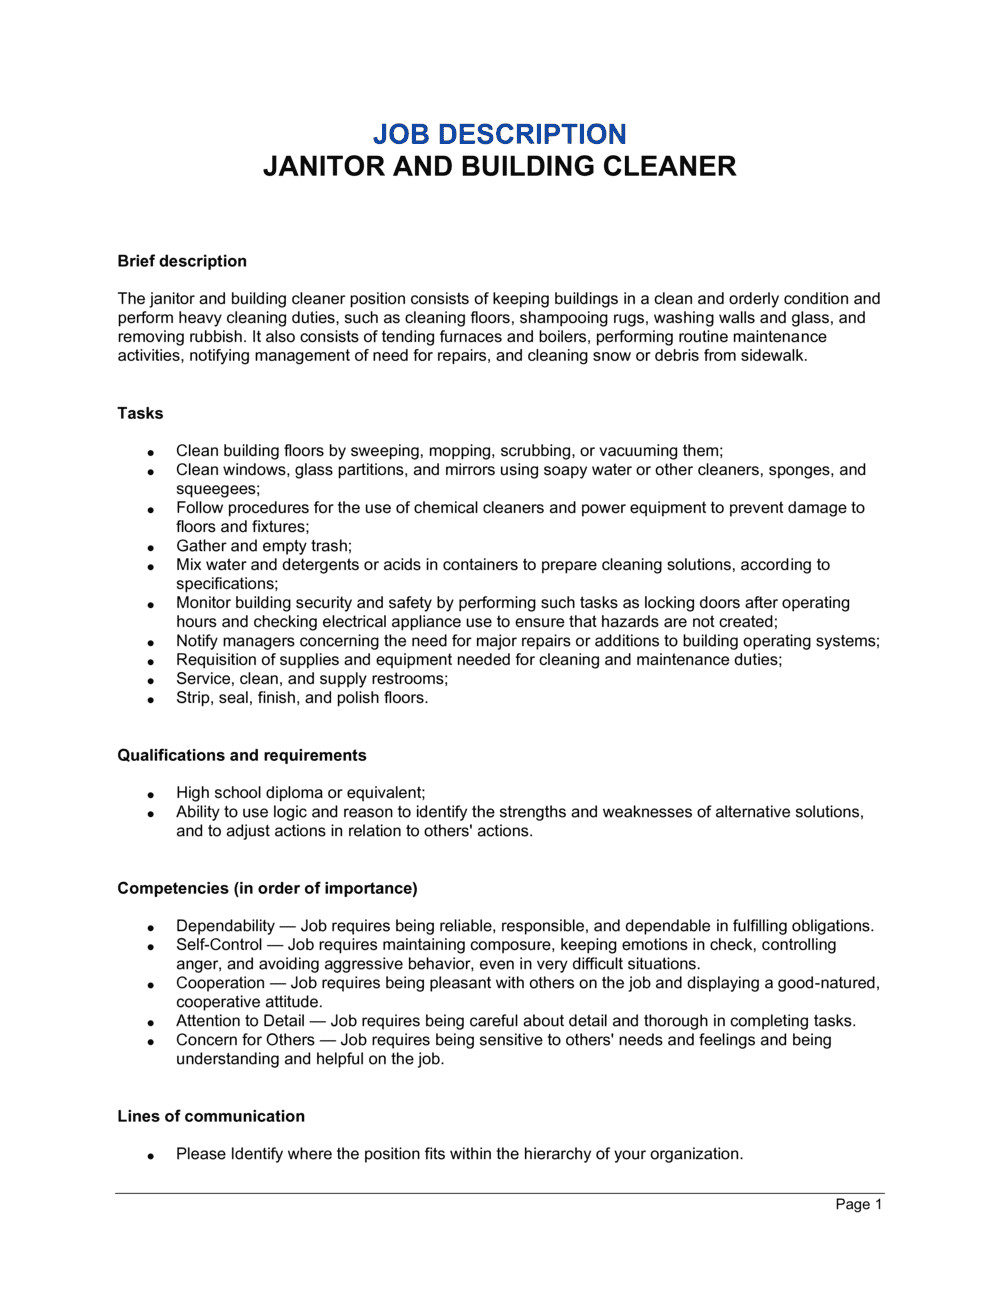 Janitor and Building Cleaner Job Description Template  by  Pertaining To Carpenter Job Description Template With Regard To Carpenter Job Description Template